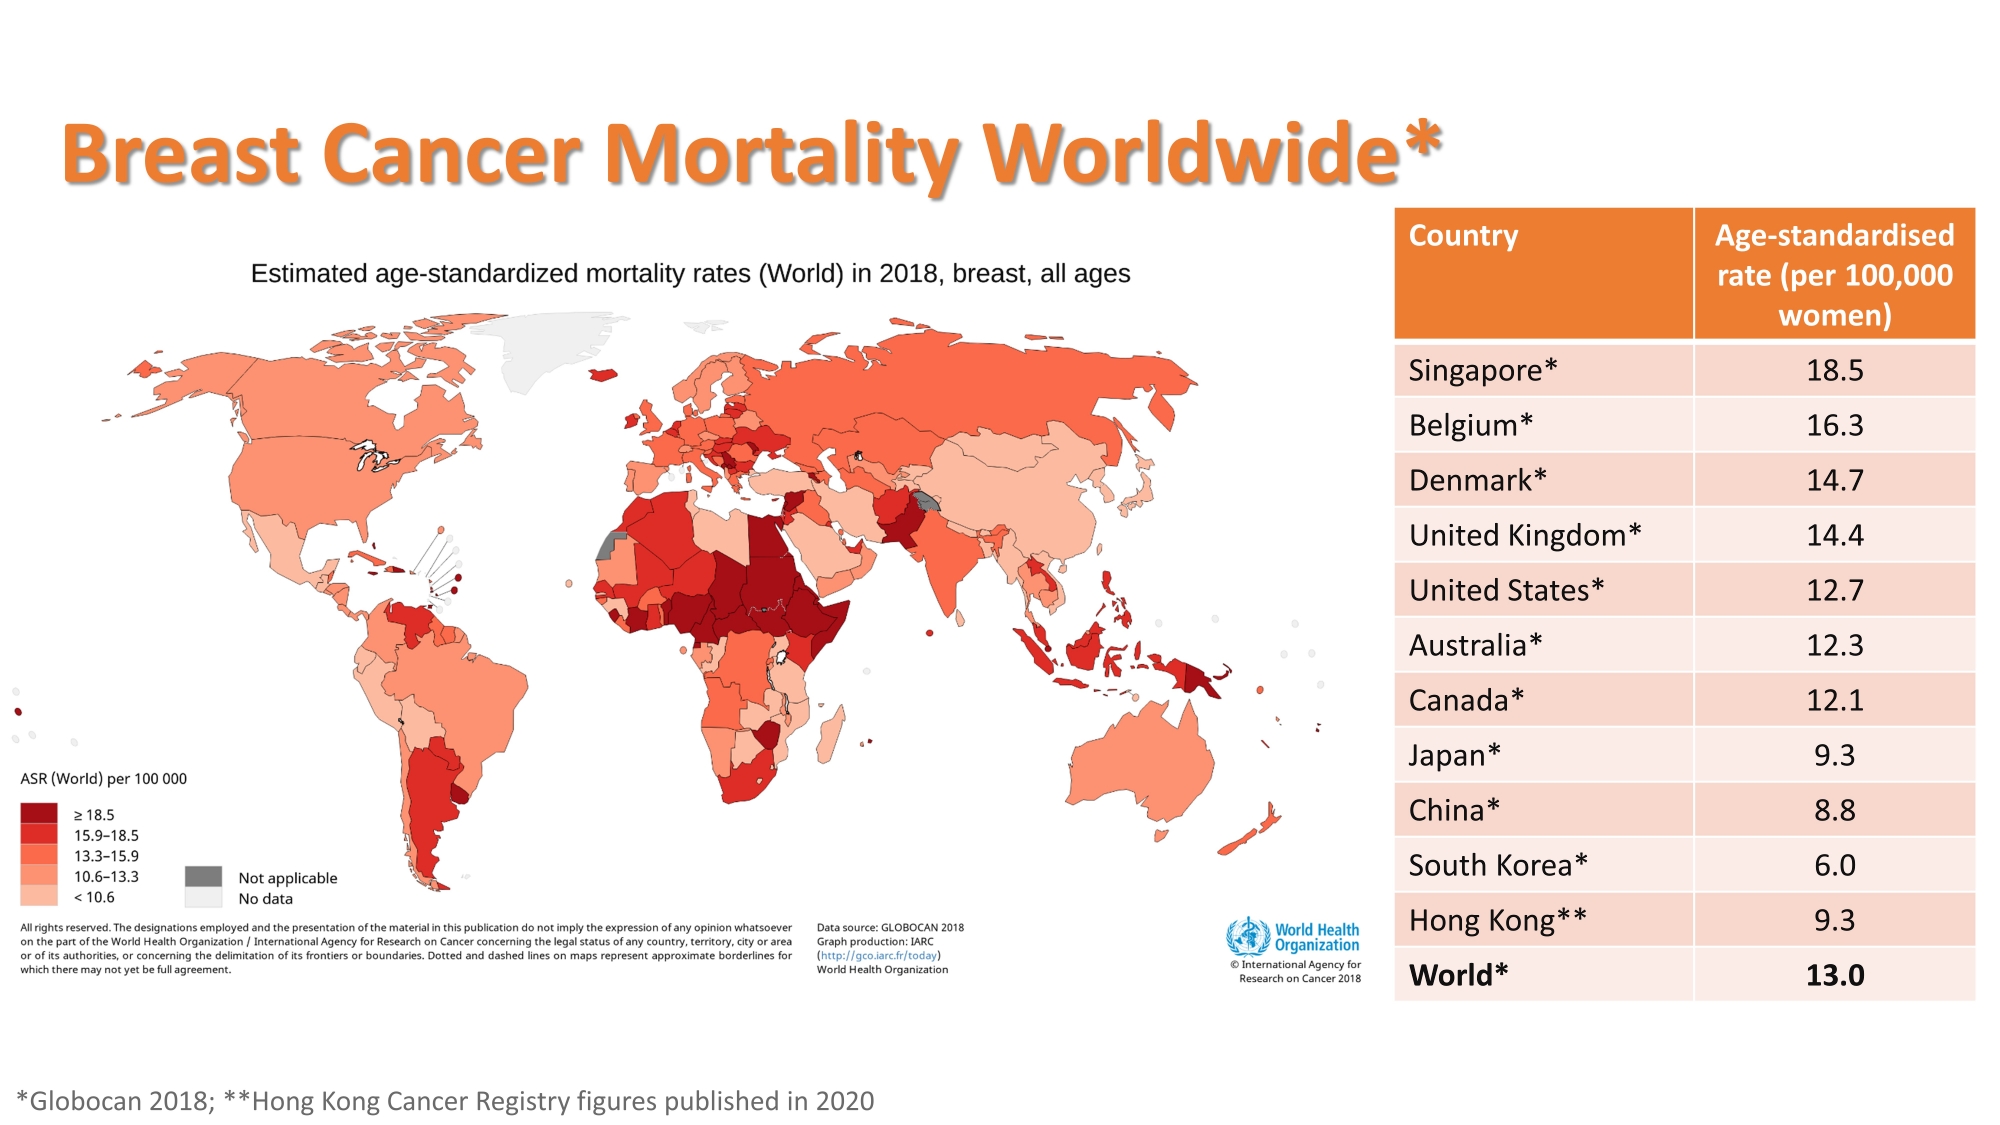 Self Photos / Files - 06. Breast Cancer Mortality Worldwide